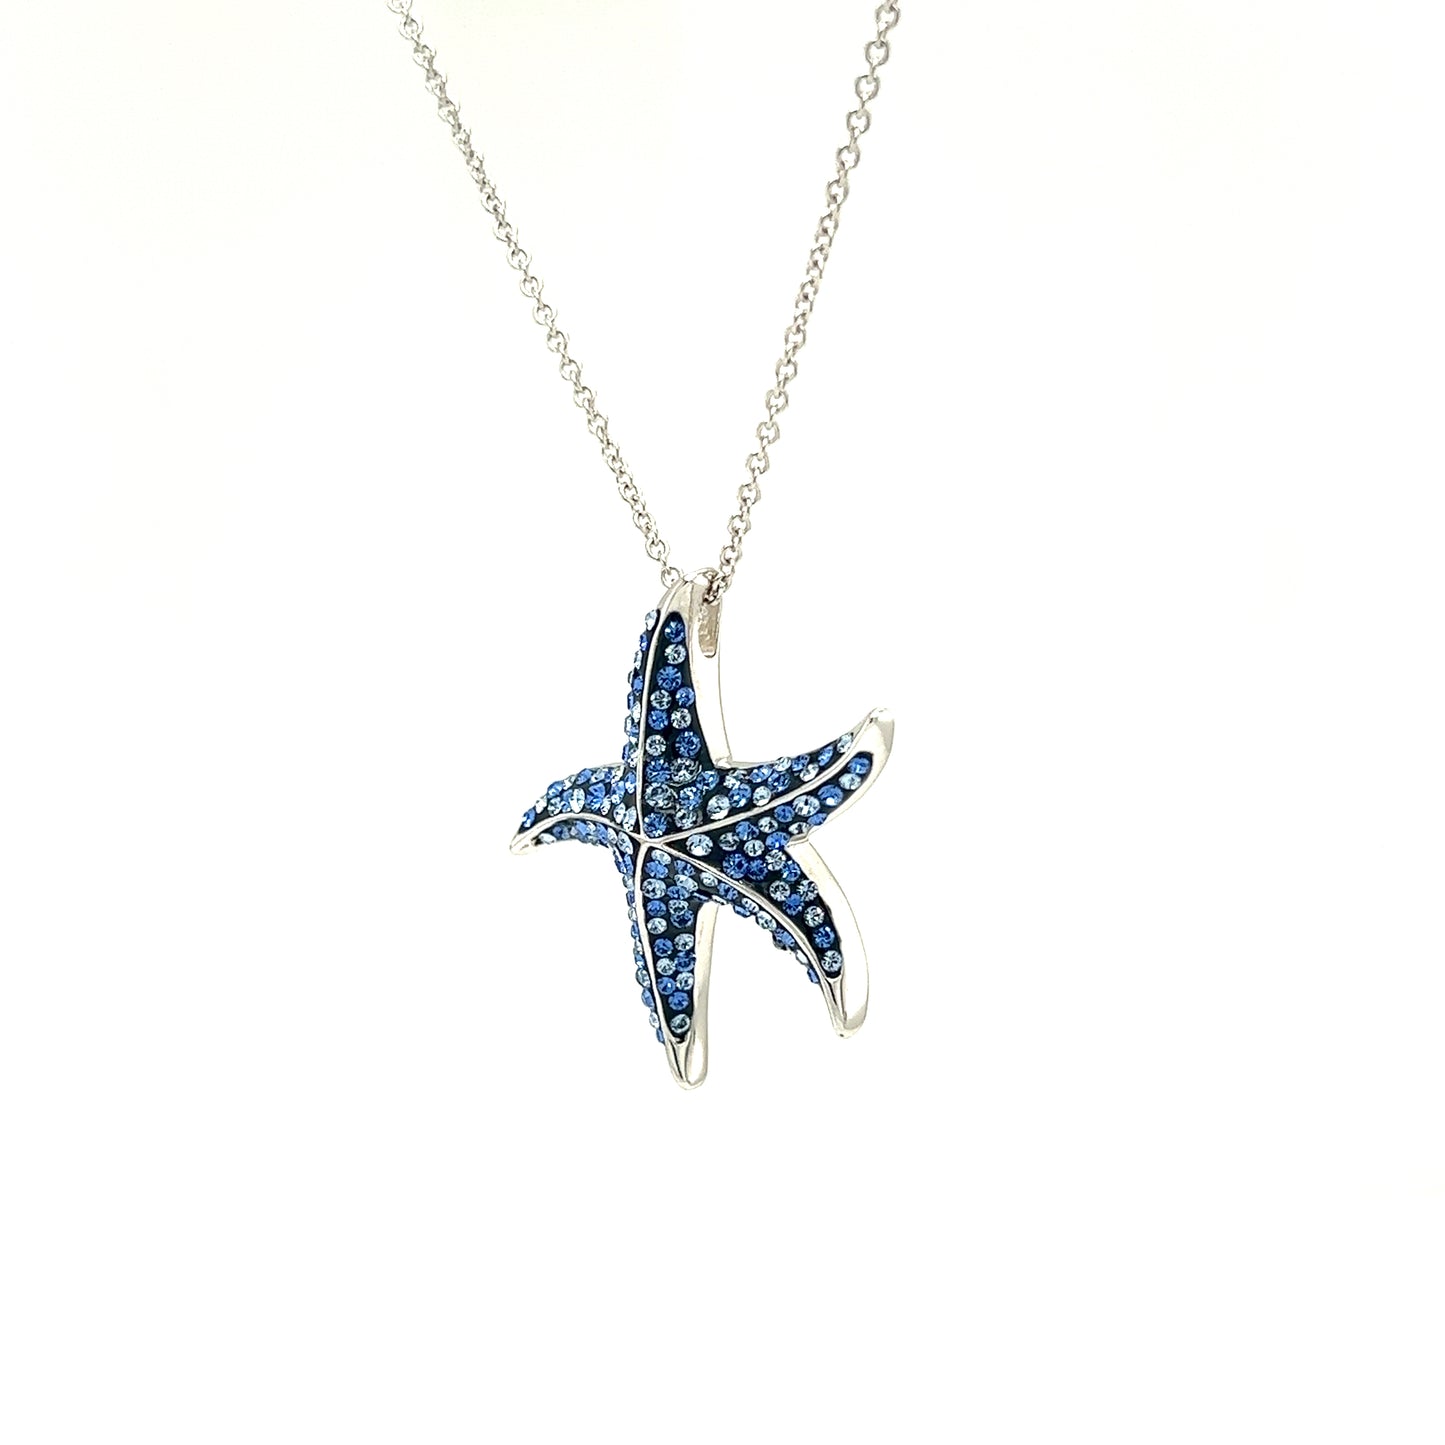 Blue Starfish Necklace with Aqua and White Crystals in Sterling Silver Right Side View